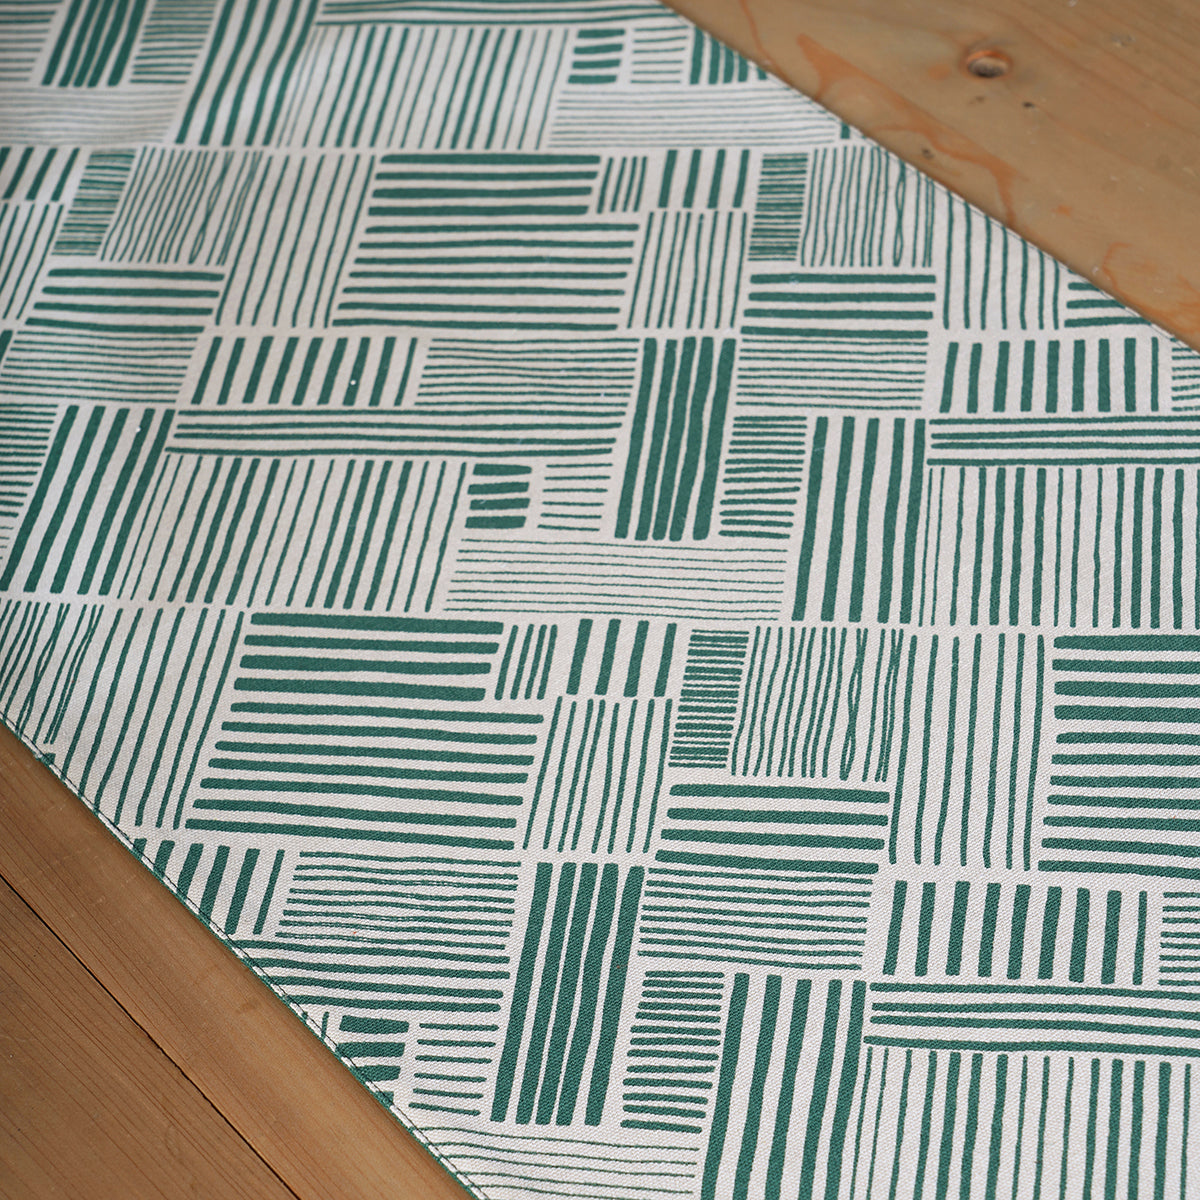 MODERN RETRO - Aqua Green cotton Table runner, stripe print with border and embroidery, sizes available